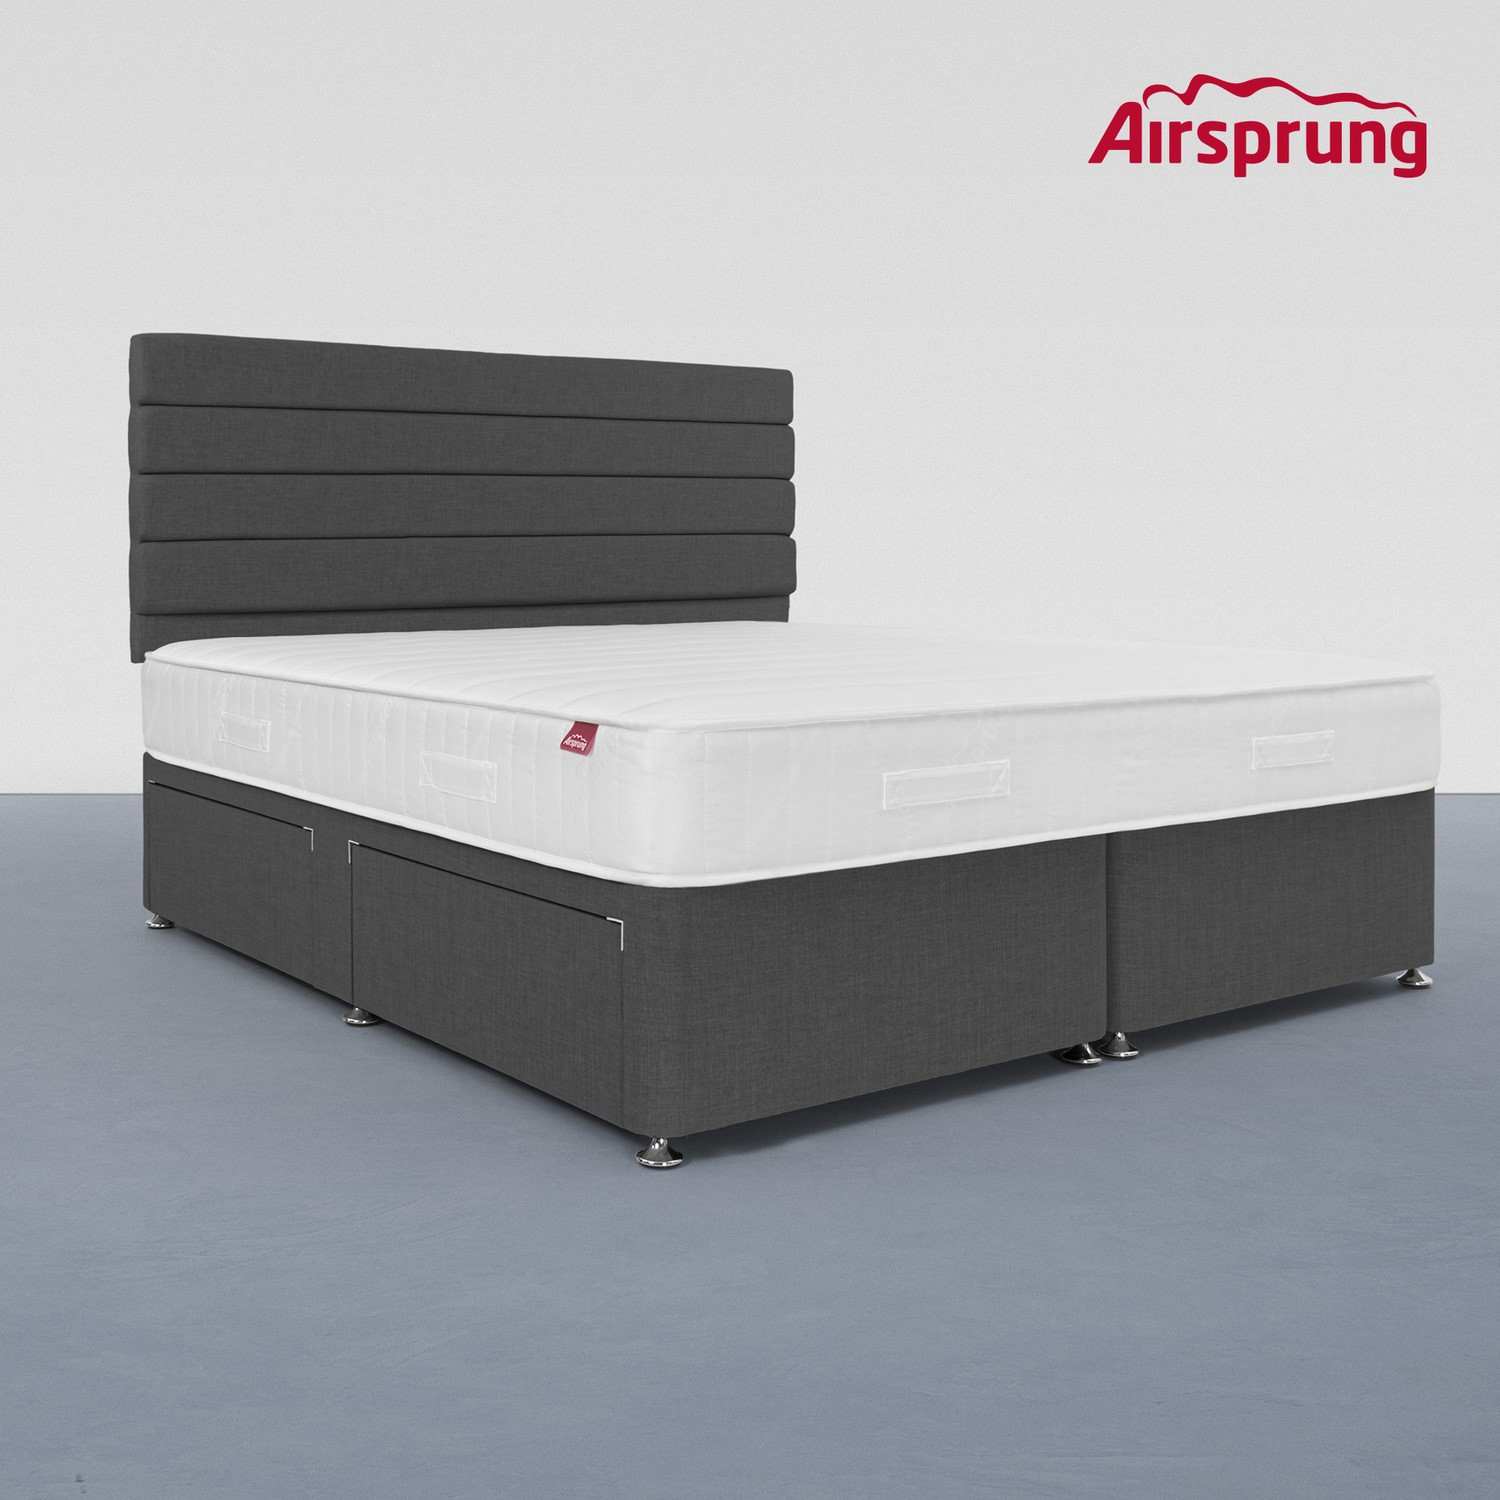 Photo of Airsprung super king 4 drawer divan bed with comfort mattress - charcoal